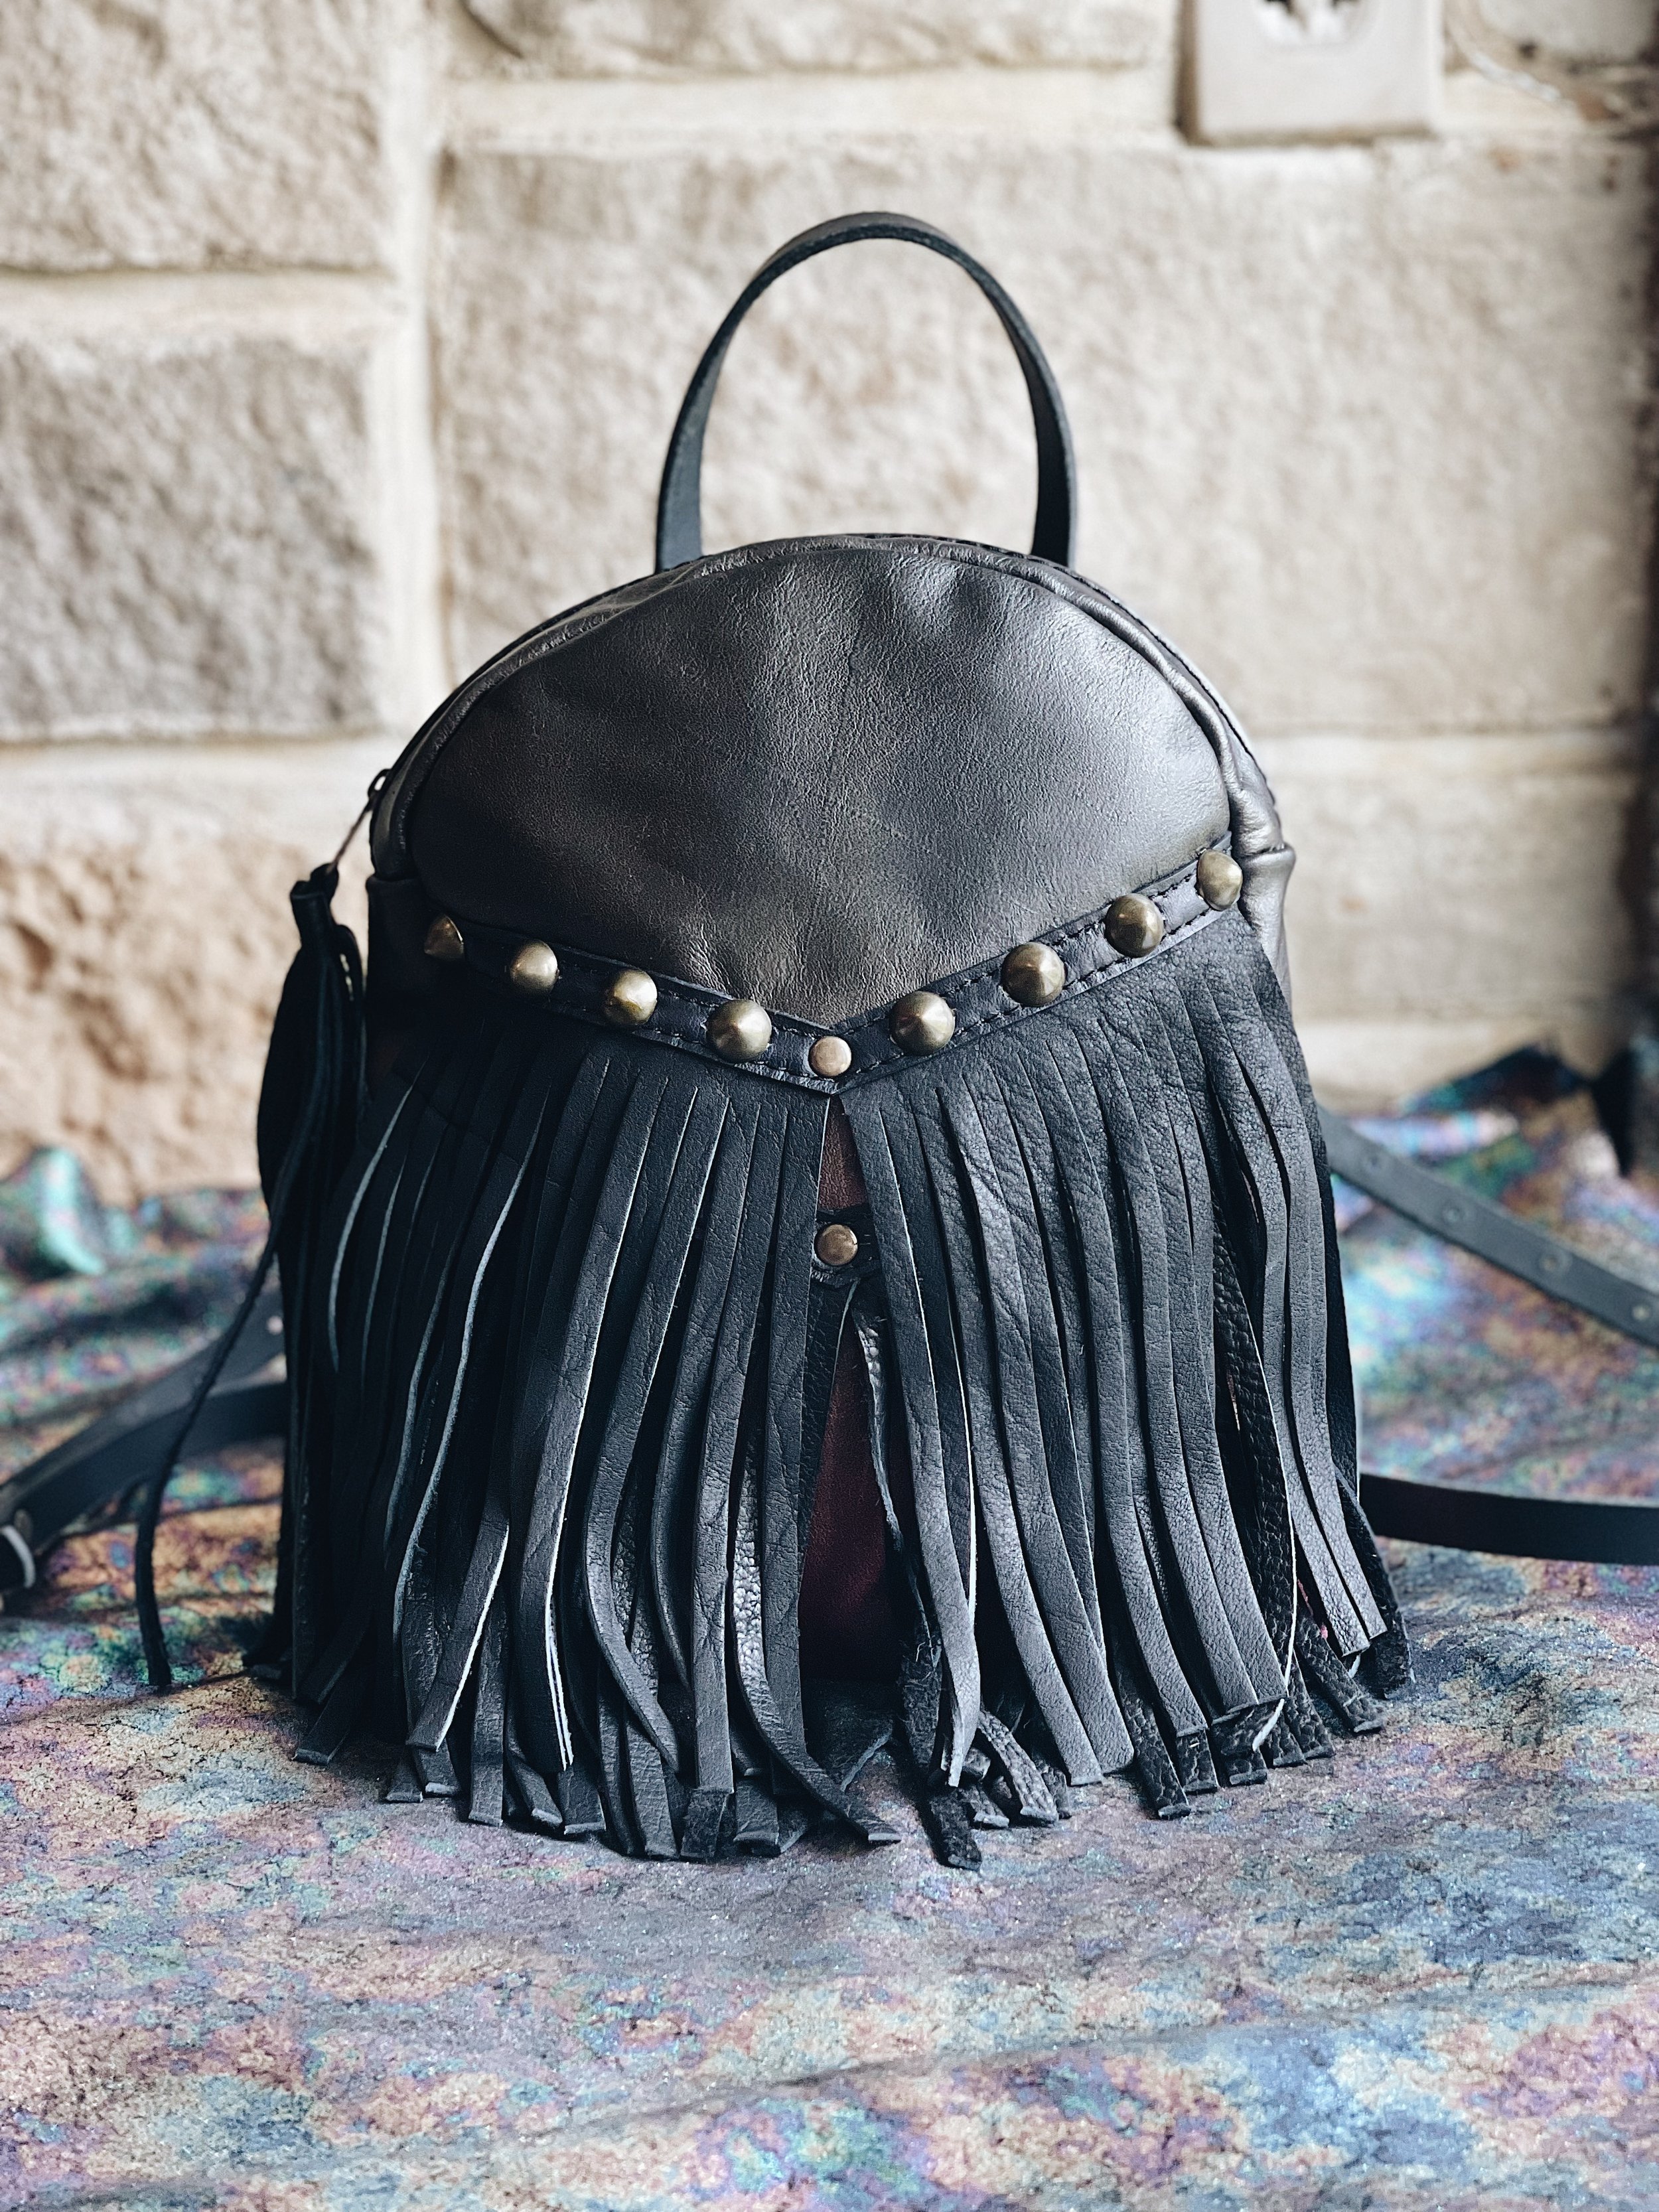  BODY: vegetable tanned leather, hand dyed pyrite and glam plum  FRINGE: black bison leather  ADDITIONS: studs and 1 simple handle 